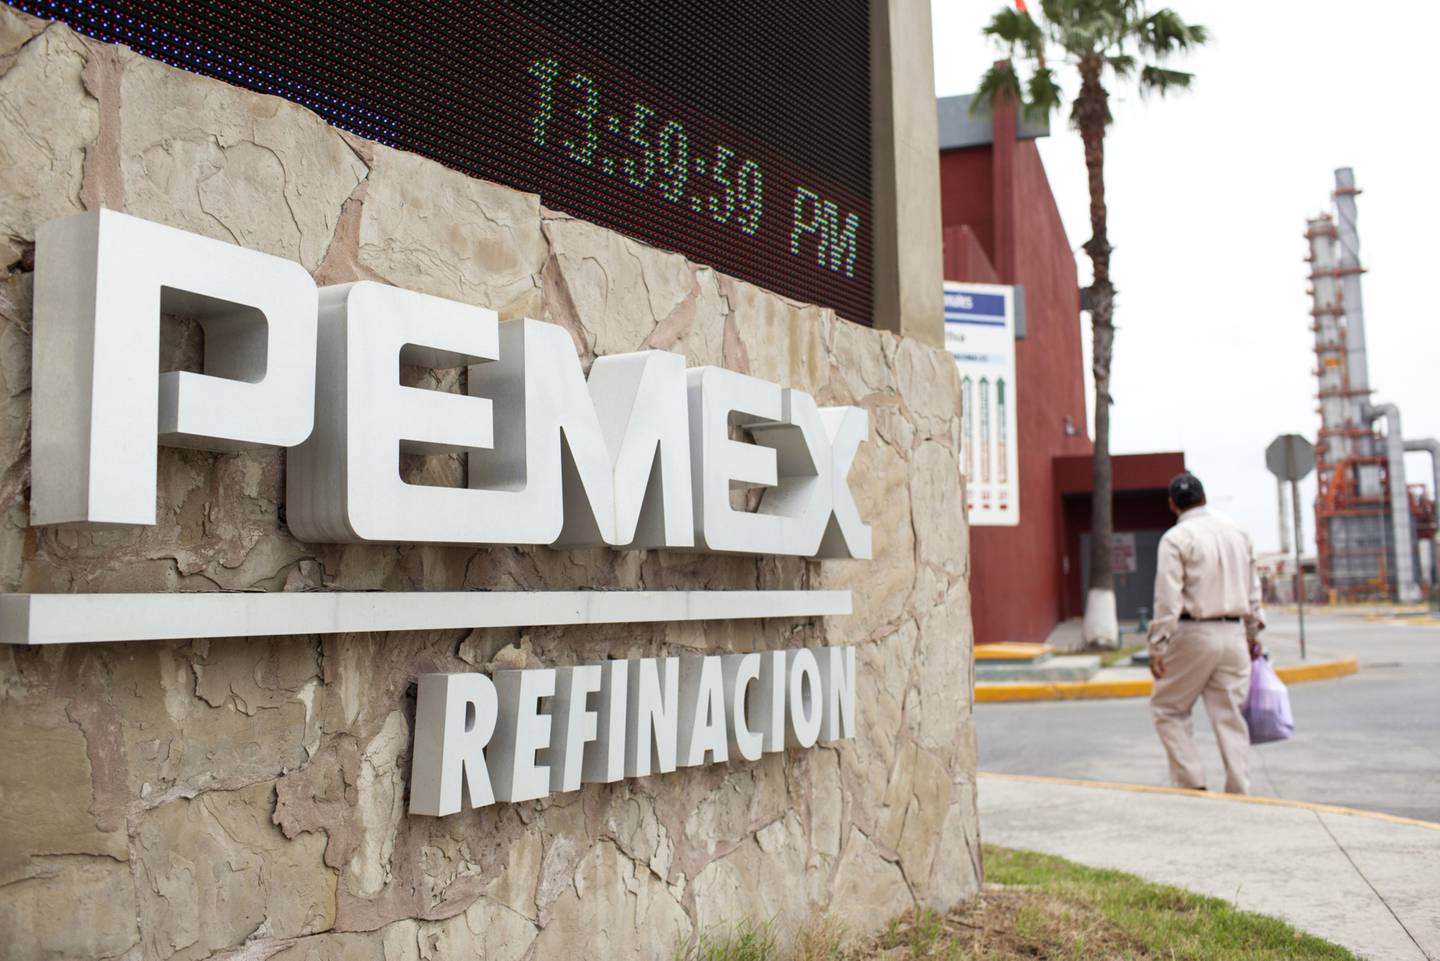 A worker walks past signage at the Petroleos Mexicanos (Pemex) refinery in Cadereyta, Mexico, on Thursday, April 7, 2016. The Mexican government expects oil output of 2.12 million barrels per day this year, according to a Finance Ministry report to congress earlier this month. Photographer: Brett Gundlock/Bloomberg